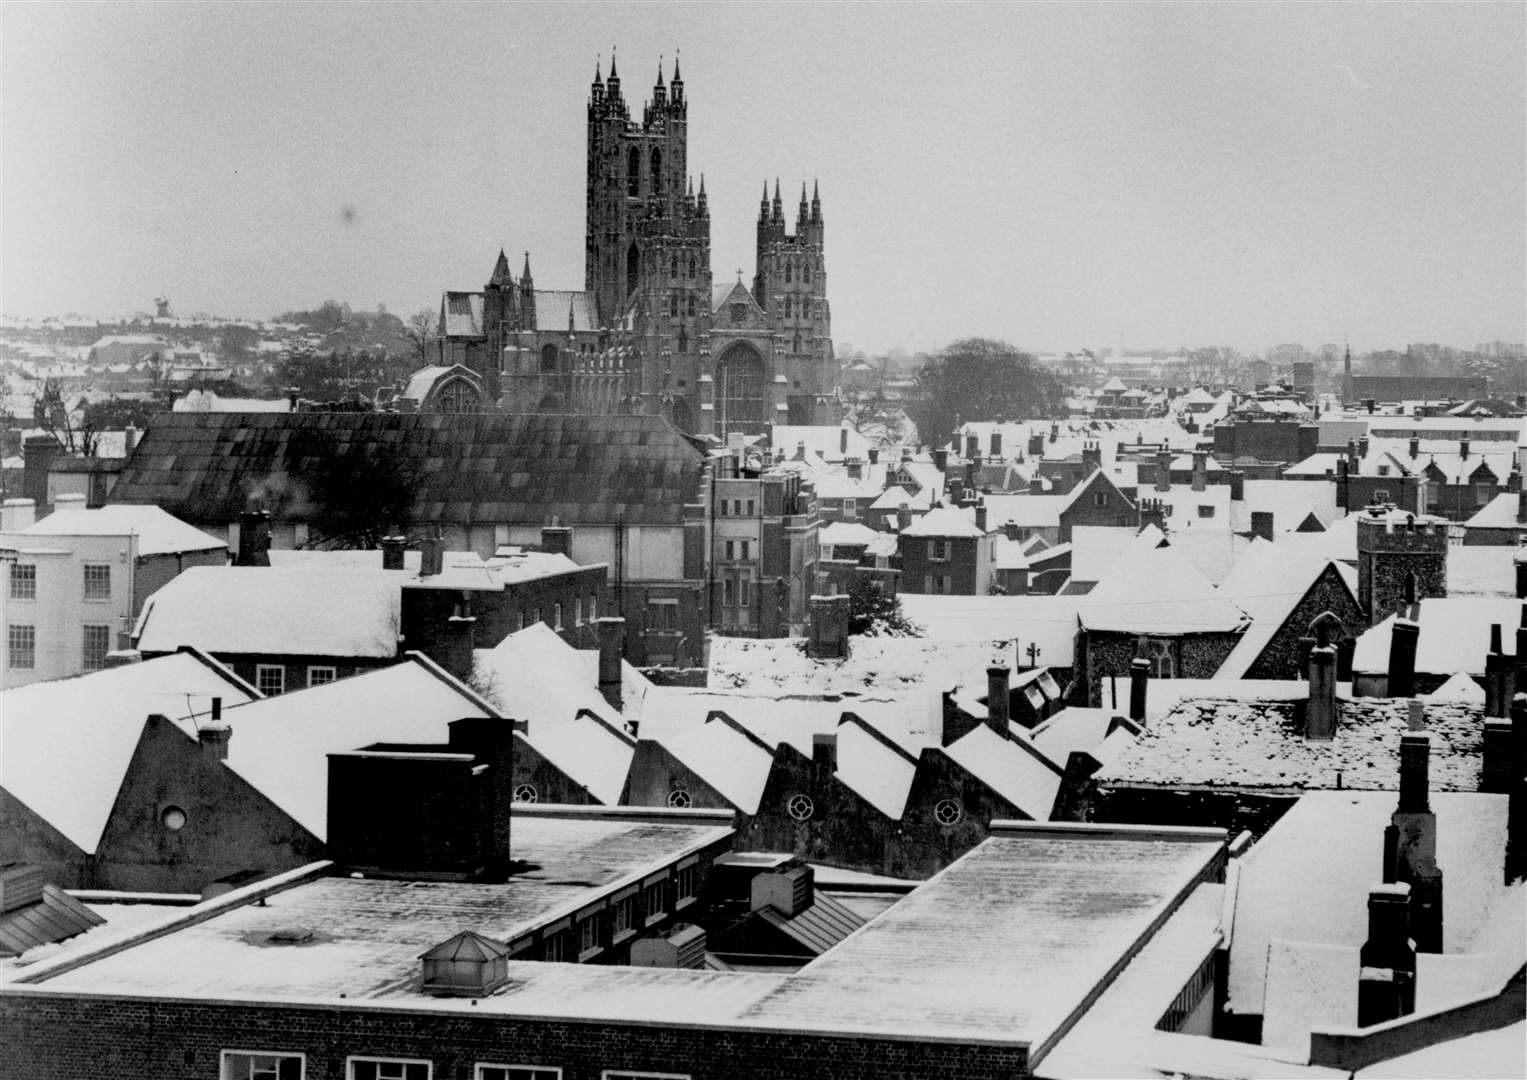 With Christmas barely gone, the snow made a seasonal postcard of Canterbury's skyline in 1962